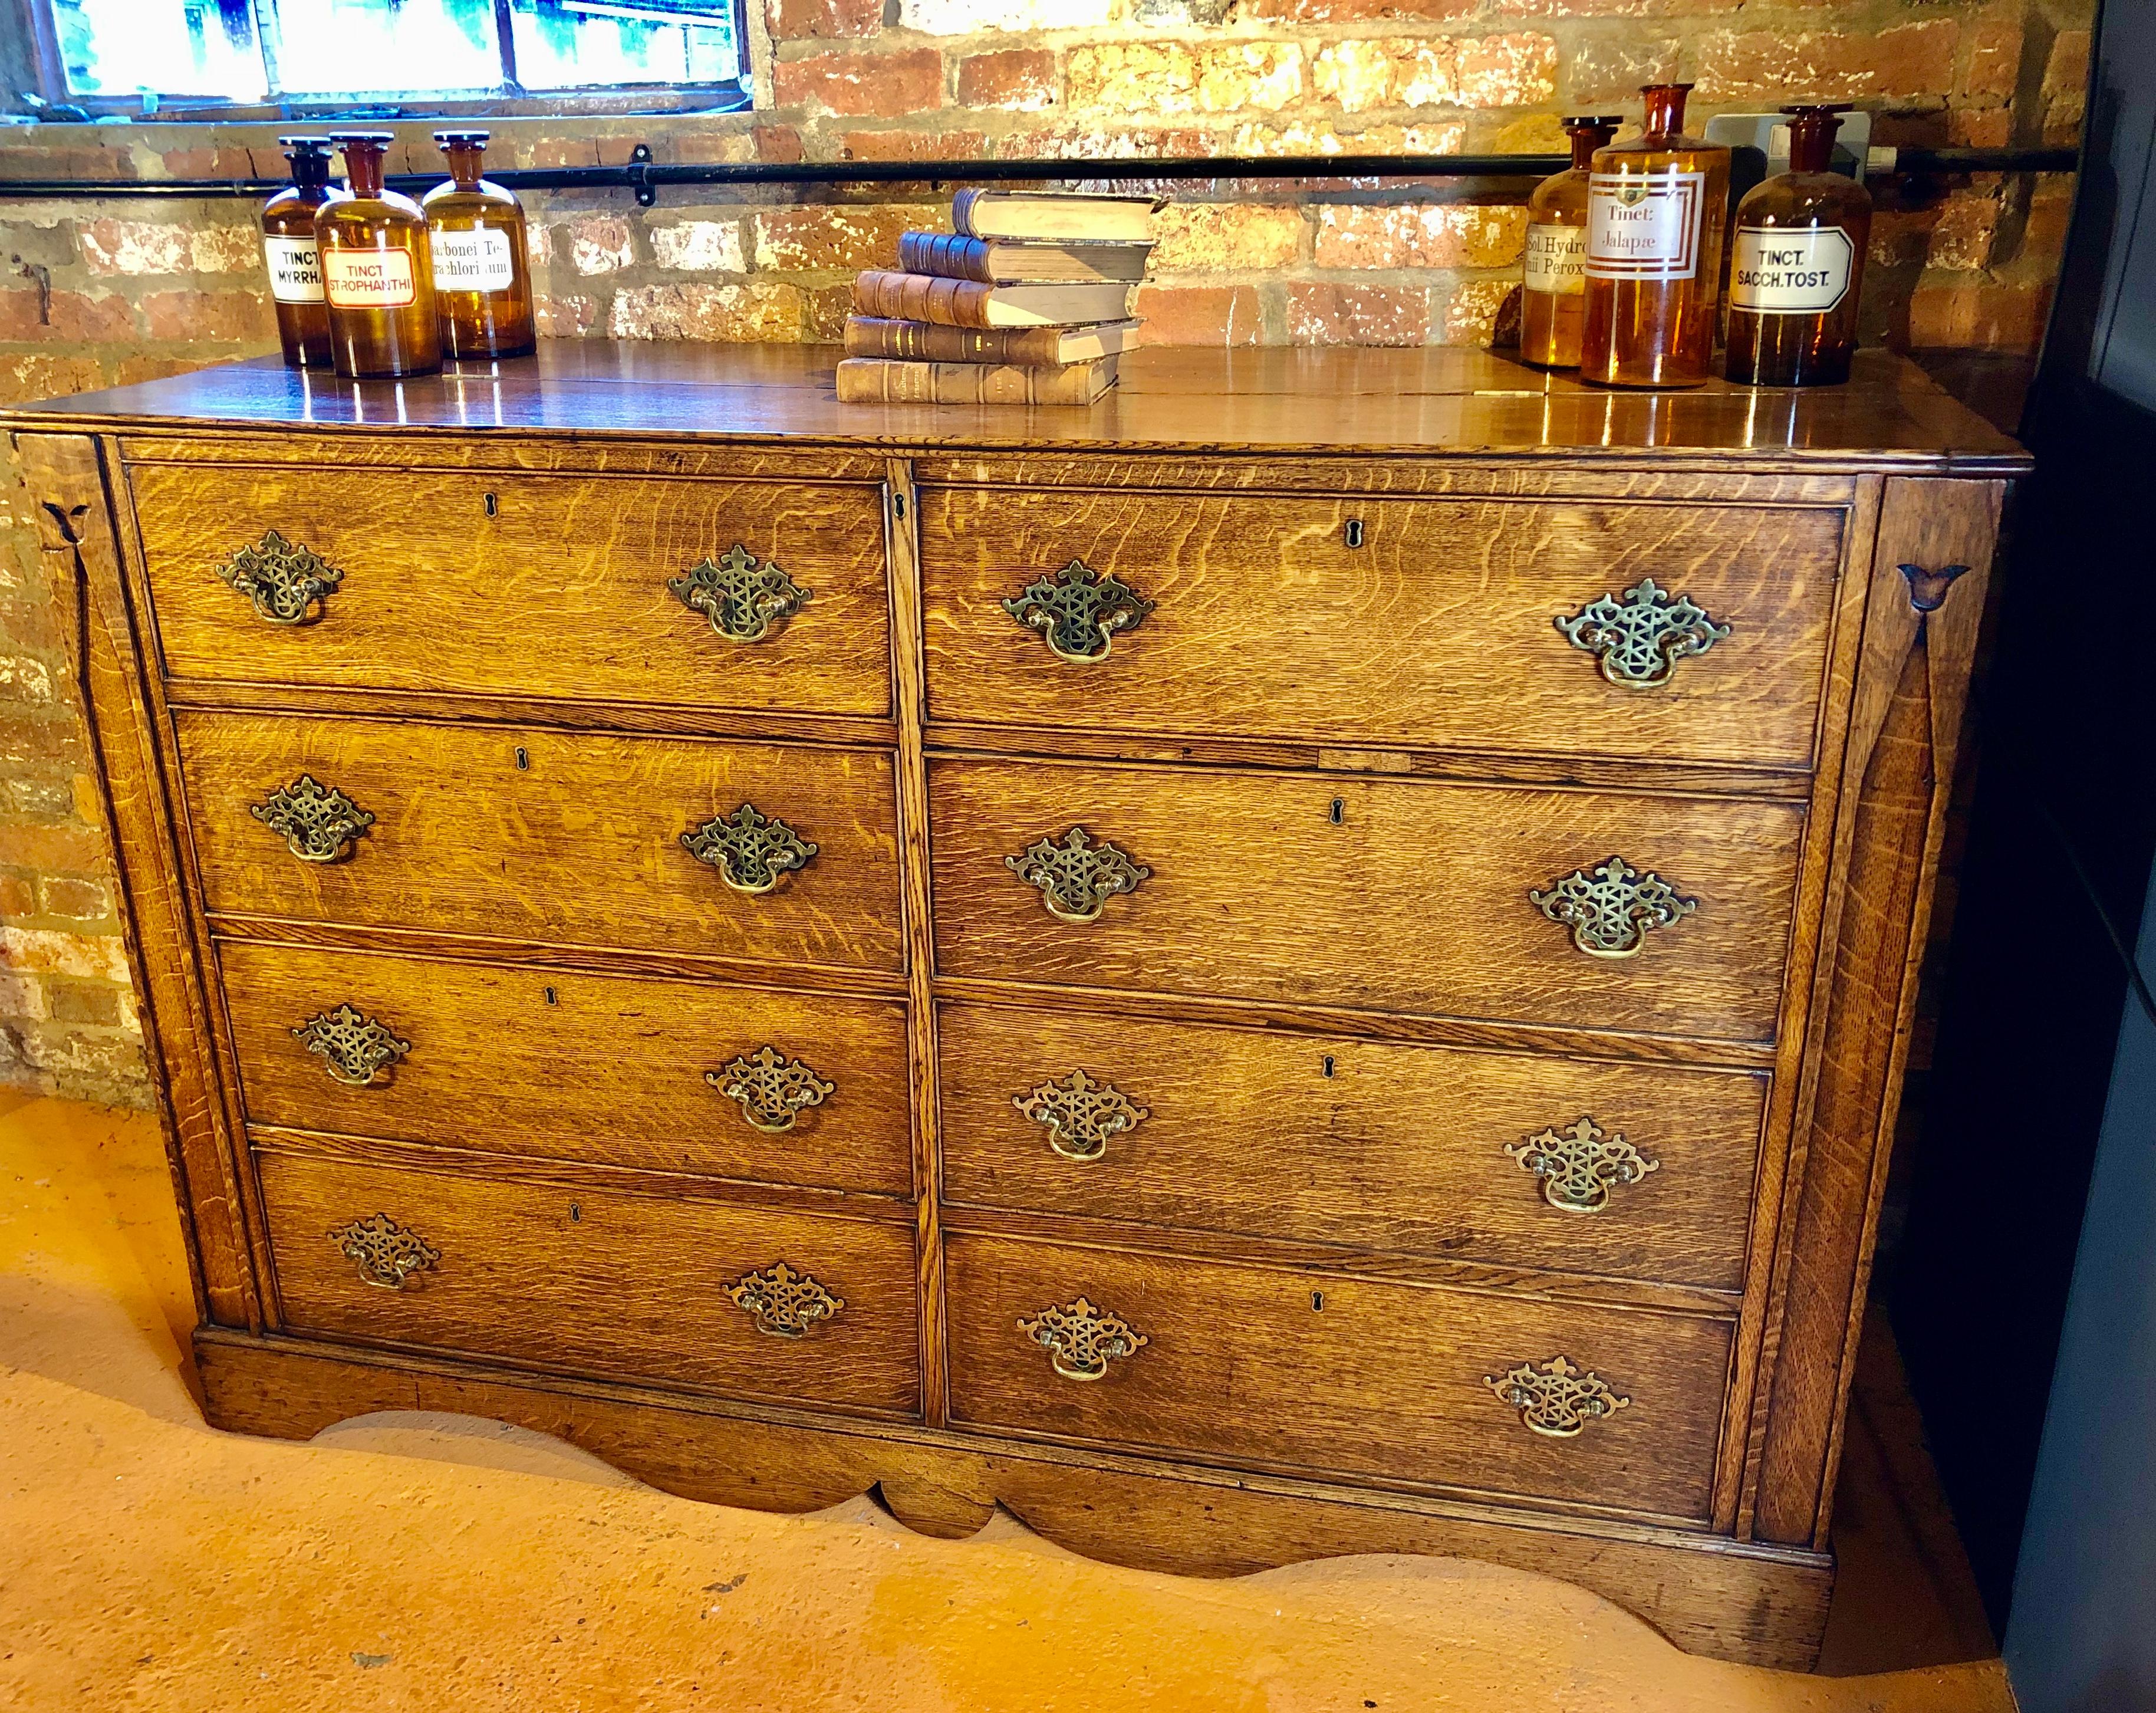 A very handsome 18th century Georgian golden oak large chest of drawers, or mule chest. Original locks and brass ware. This double size chest of drawers has a very useful amount of storage space with its six slide out drawers and double size top